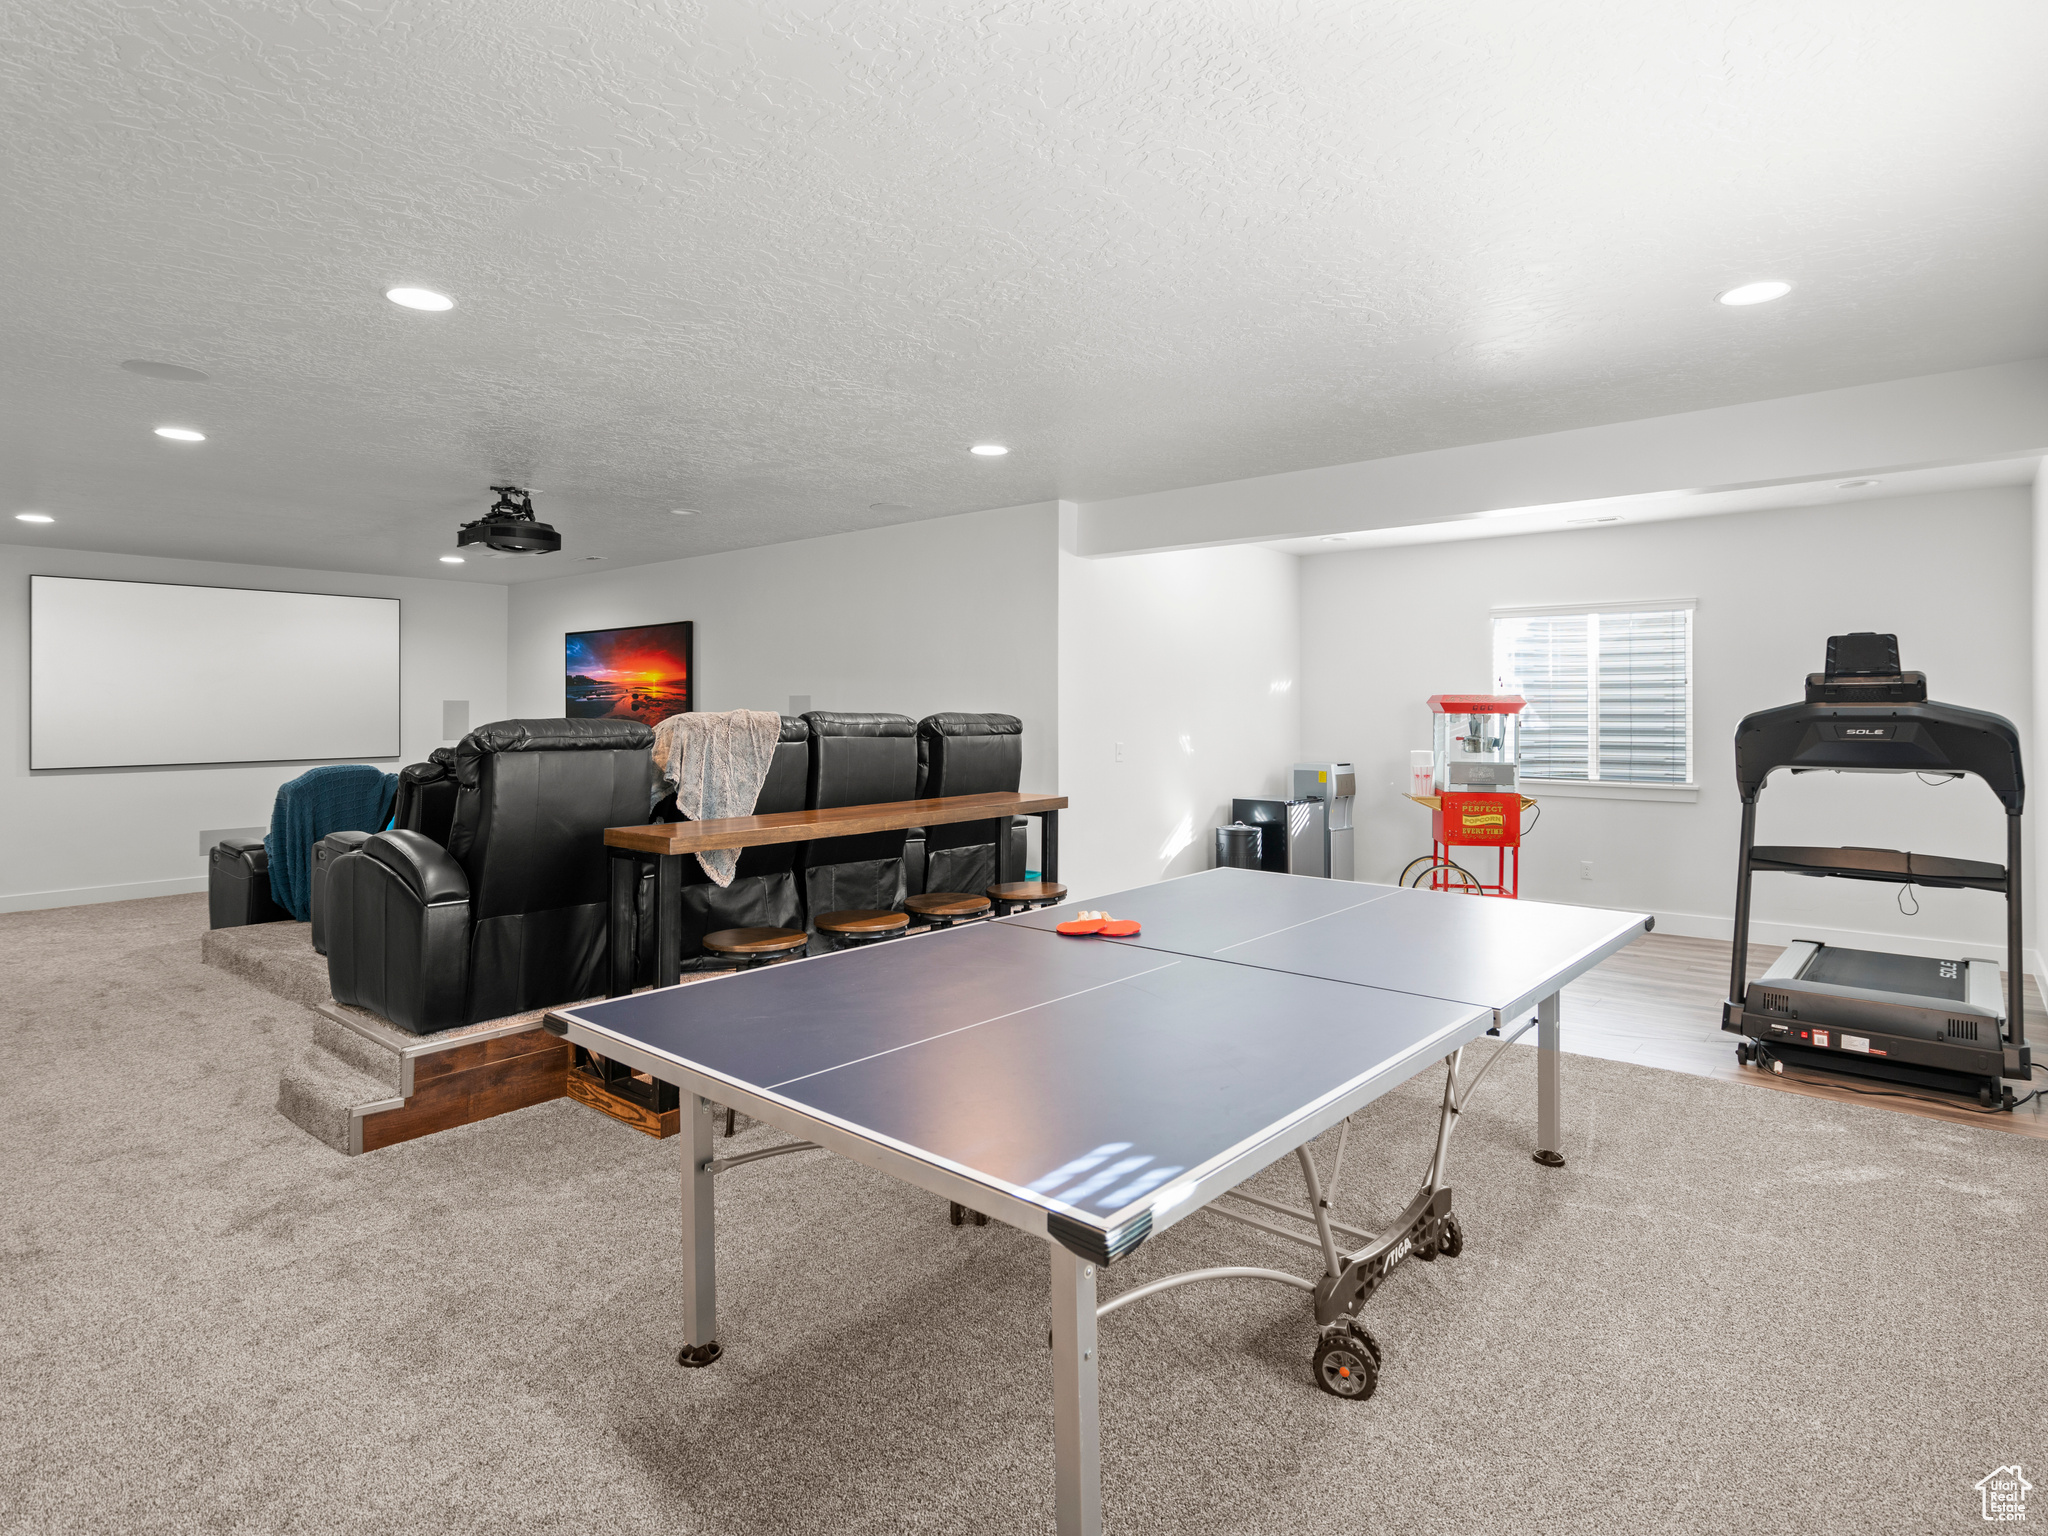 Game room featuring a textured ceiling and light colored carpet